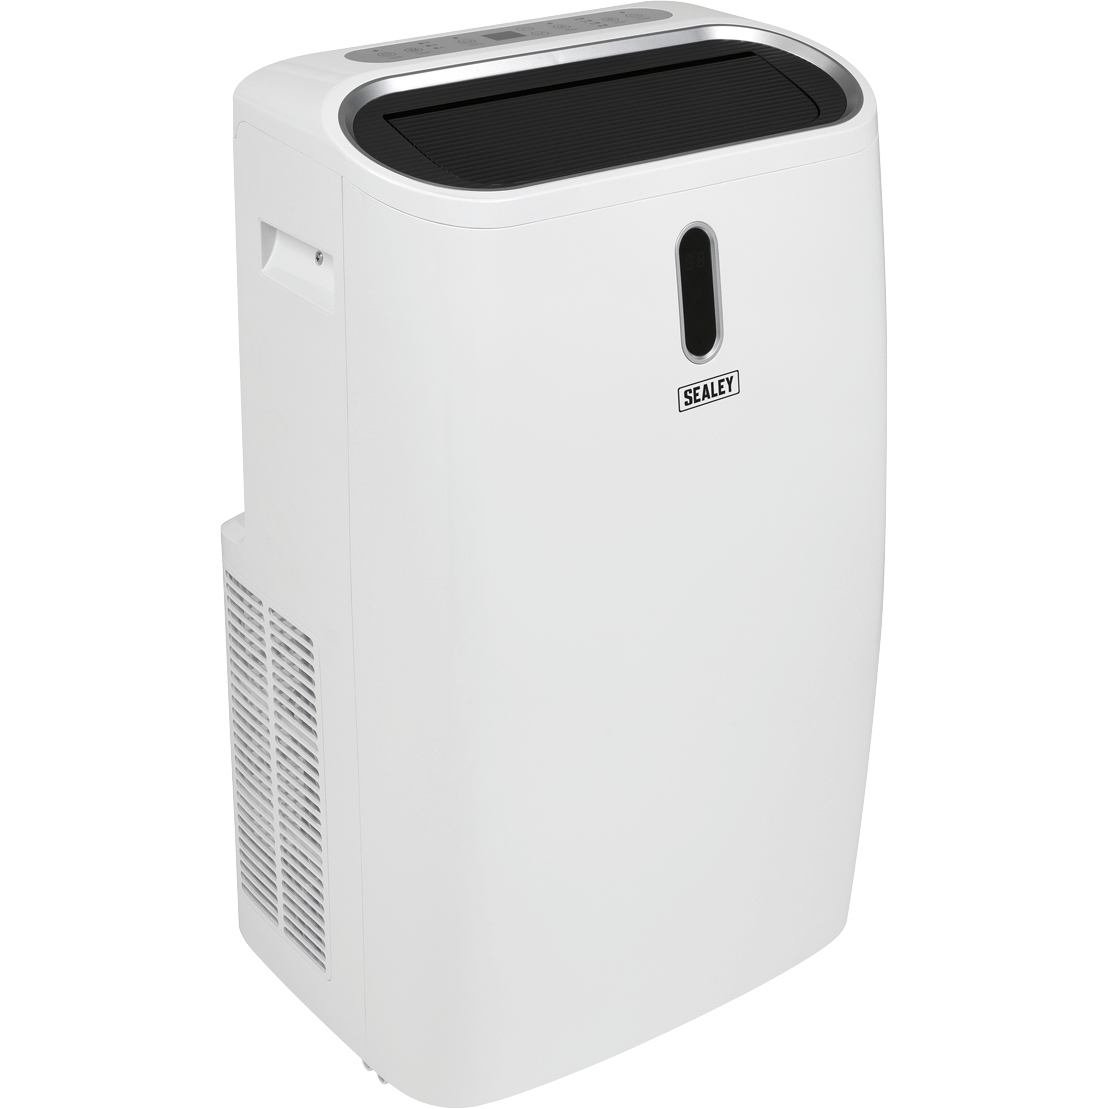 Sealey SAC12000 Air Conditioner Dehumidifier and Heater 240v